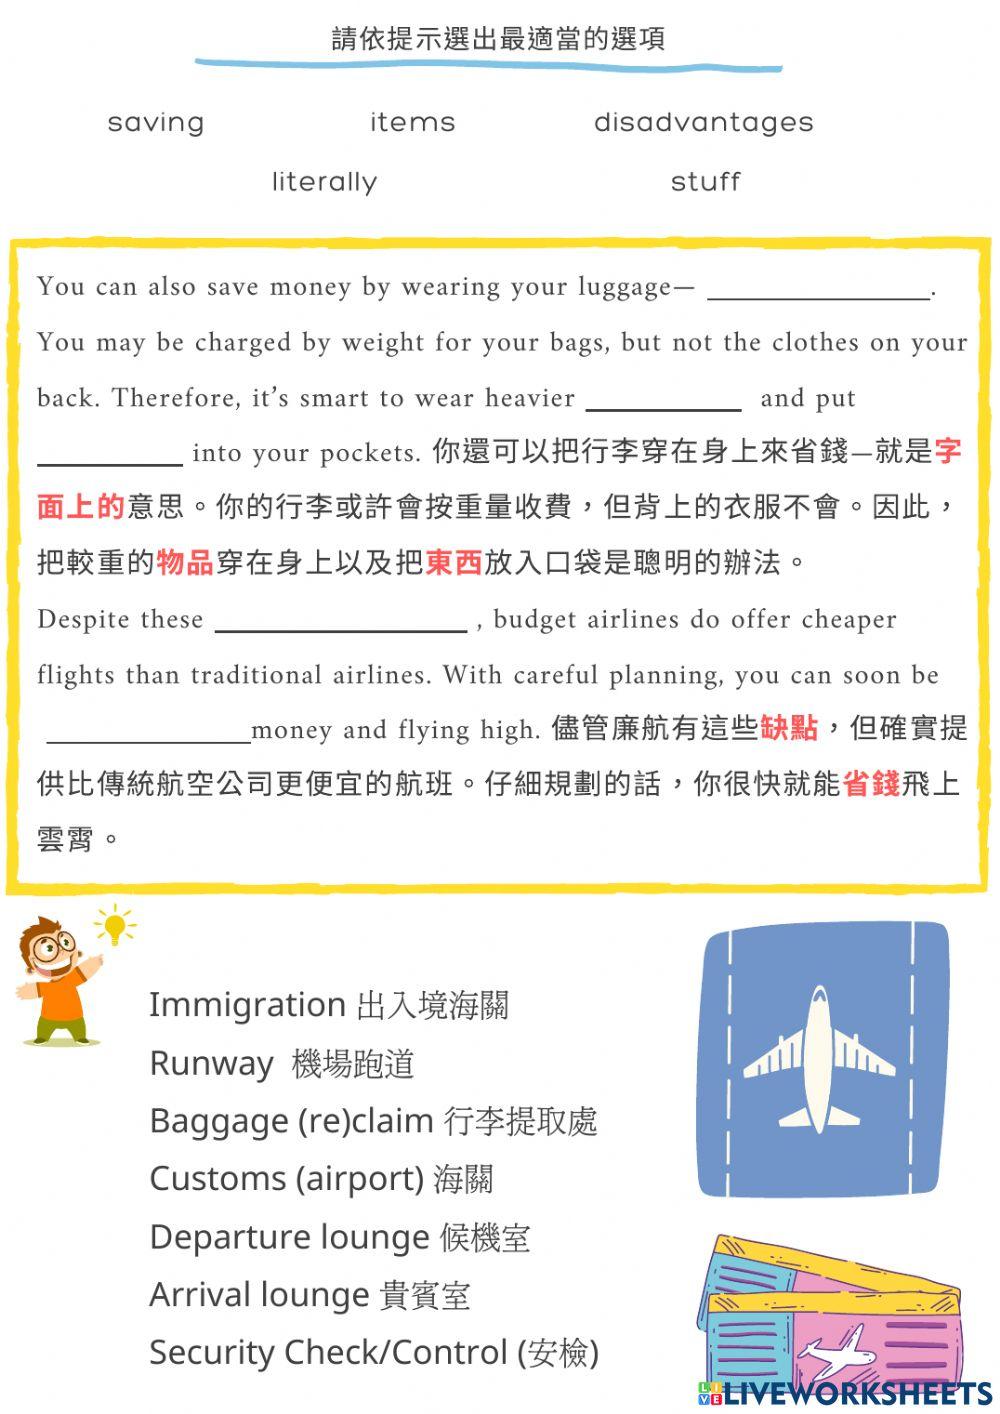 Unit 9 Do Your Homework about Budget Airlines  for 竹東高中